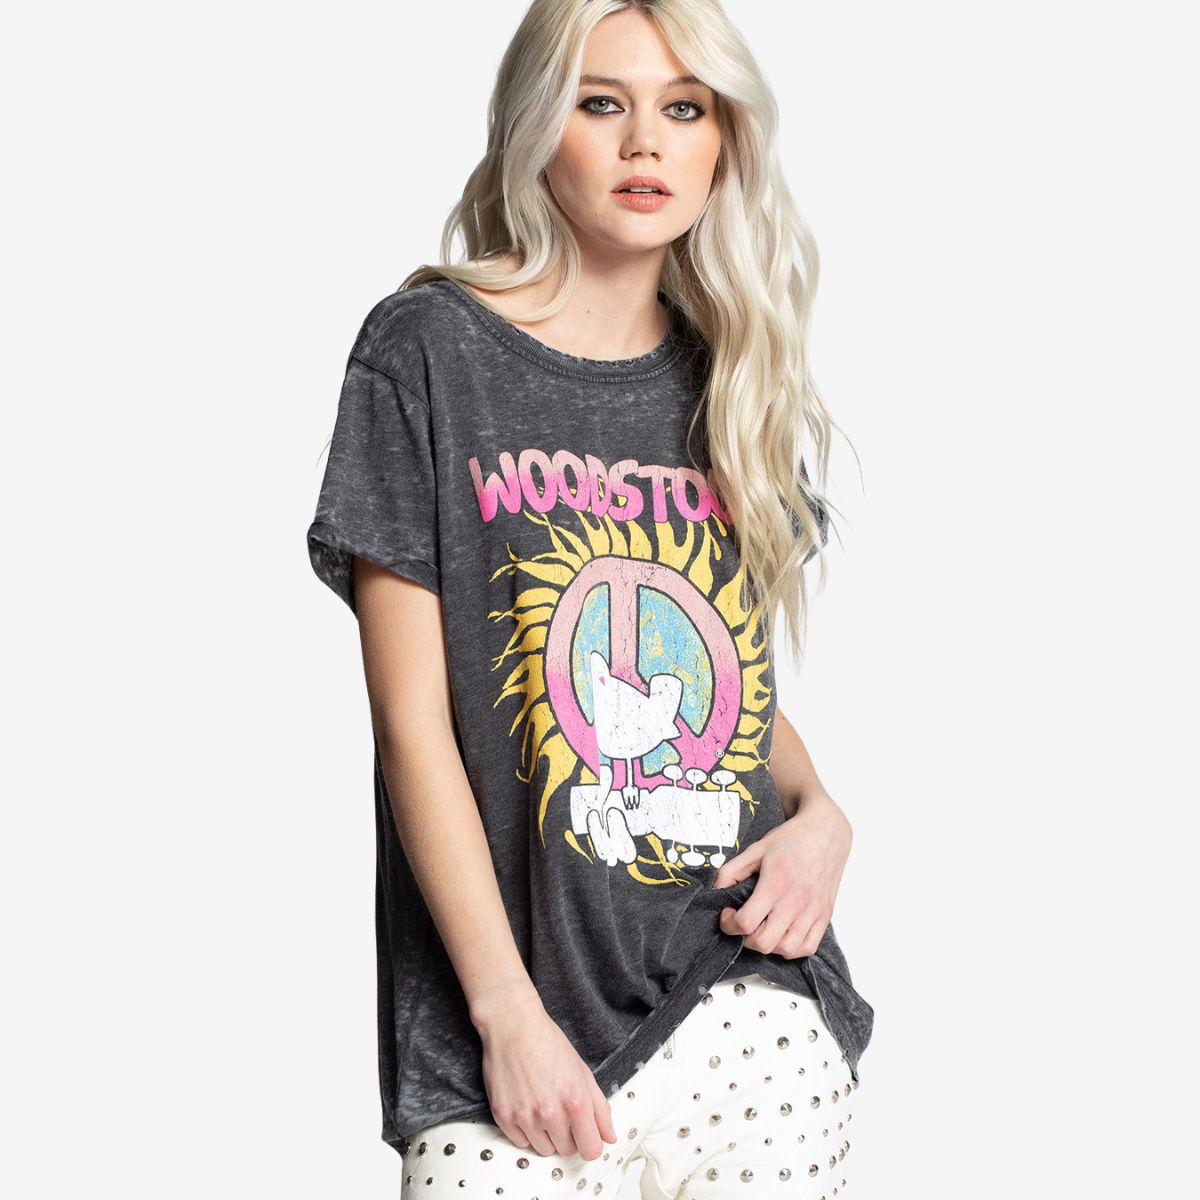 Woodstock Fitted Tee with Back NY 1969 Design by Recycled Karma image number 3